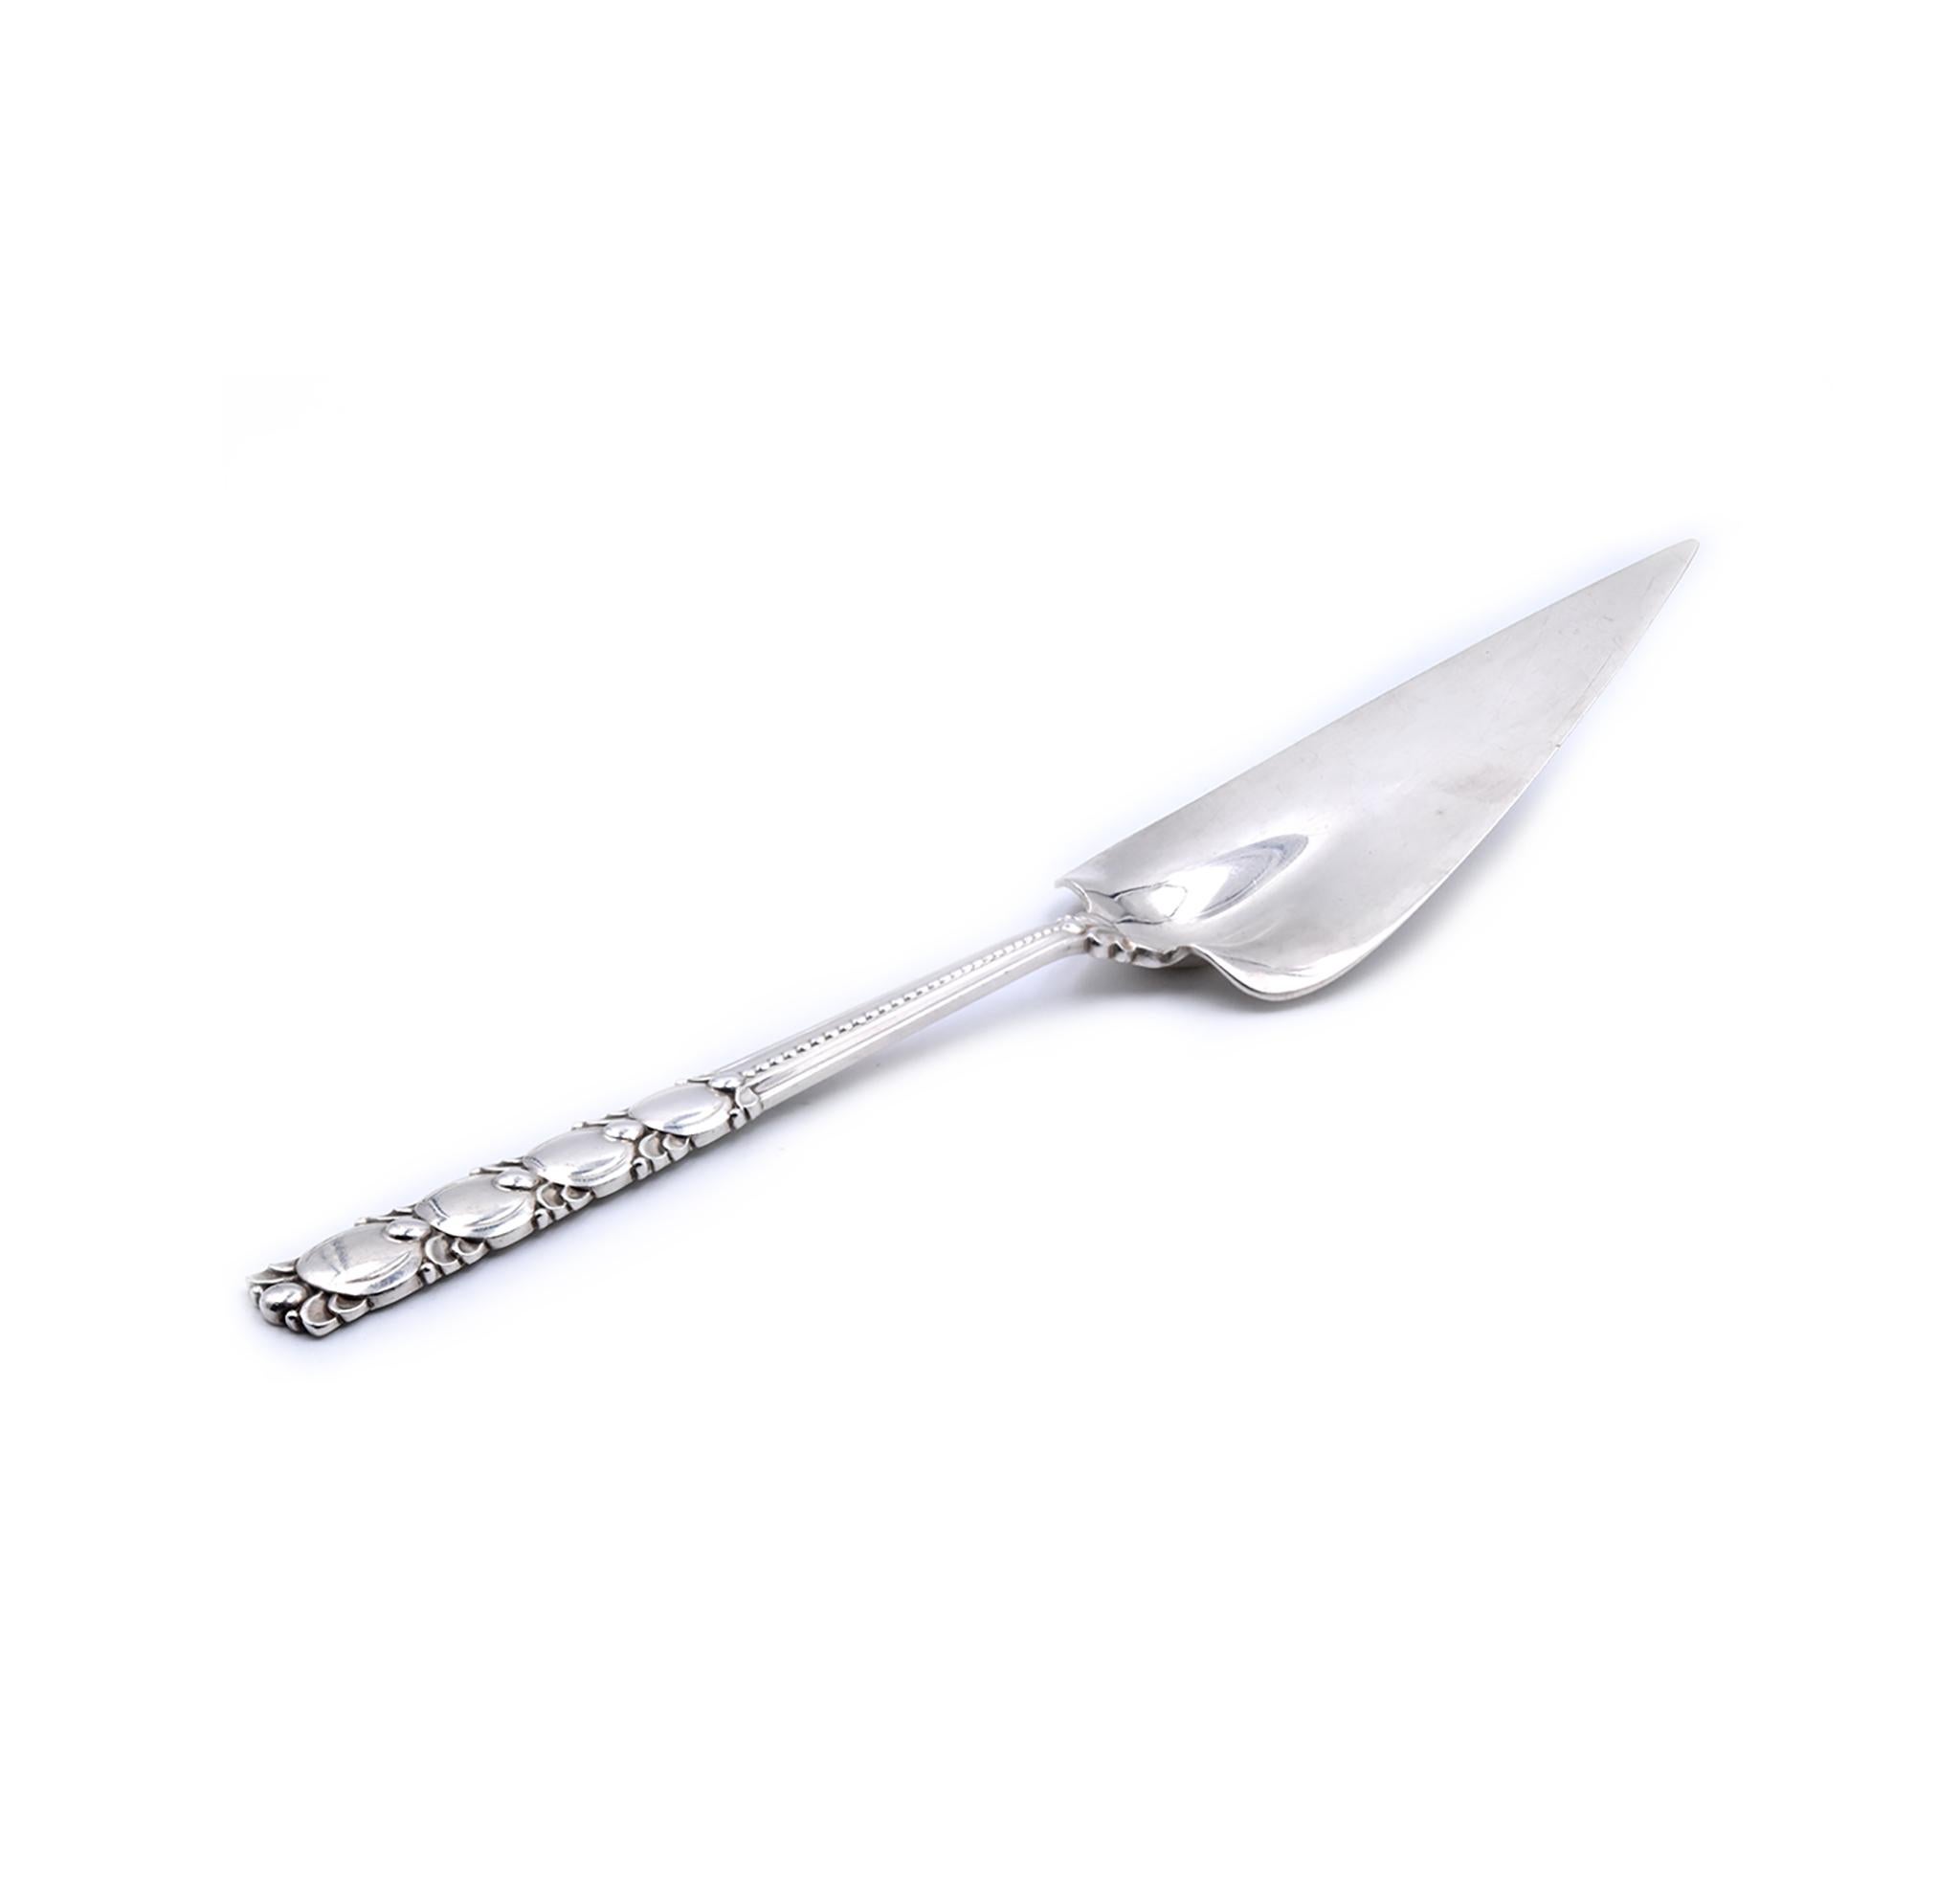 Designer: Tiffany & Co. 
Material: sterling silver
Dimensions: server measures 12 ¼” X 2 ¼“  
Weight: 167.85 grams
